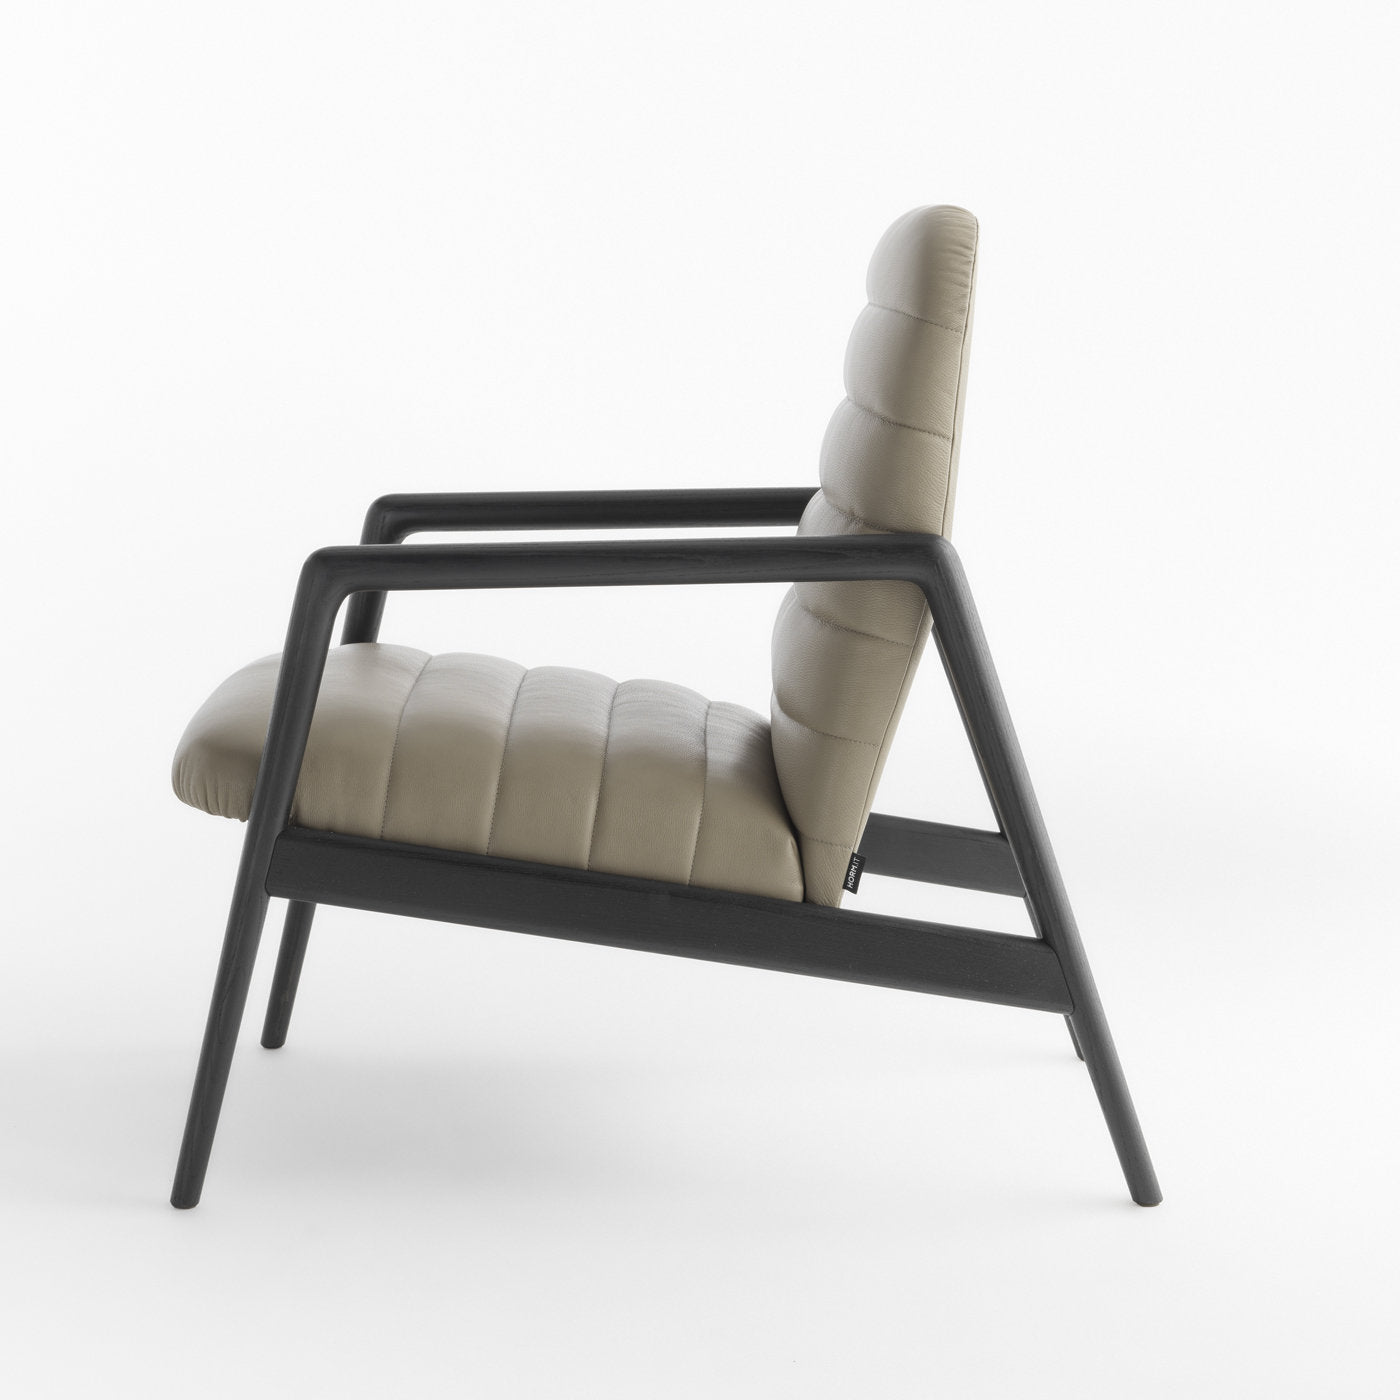 Carnaby Beige Armchair by Studio Balutto - Alternative view 2